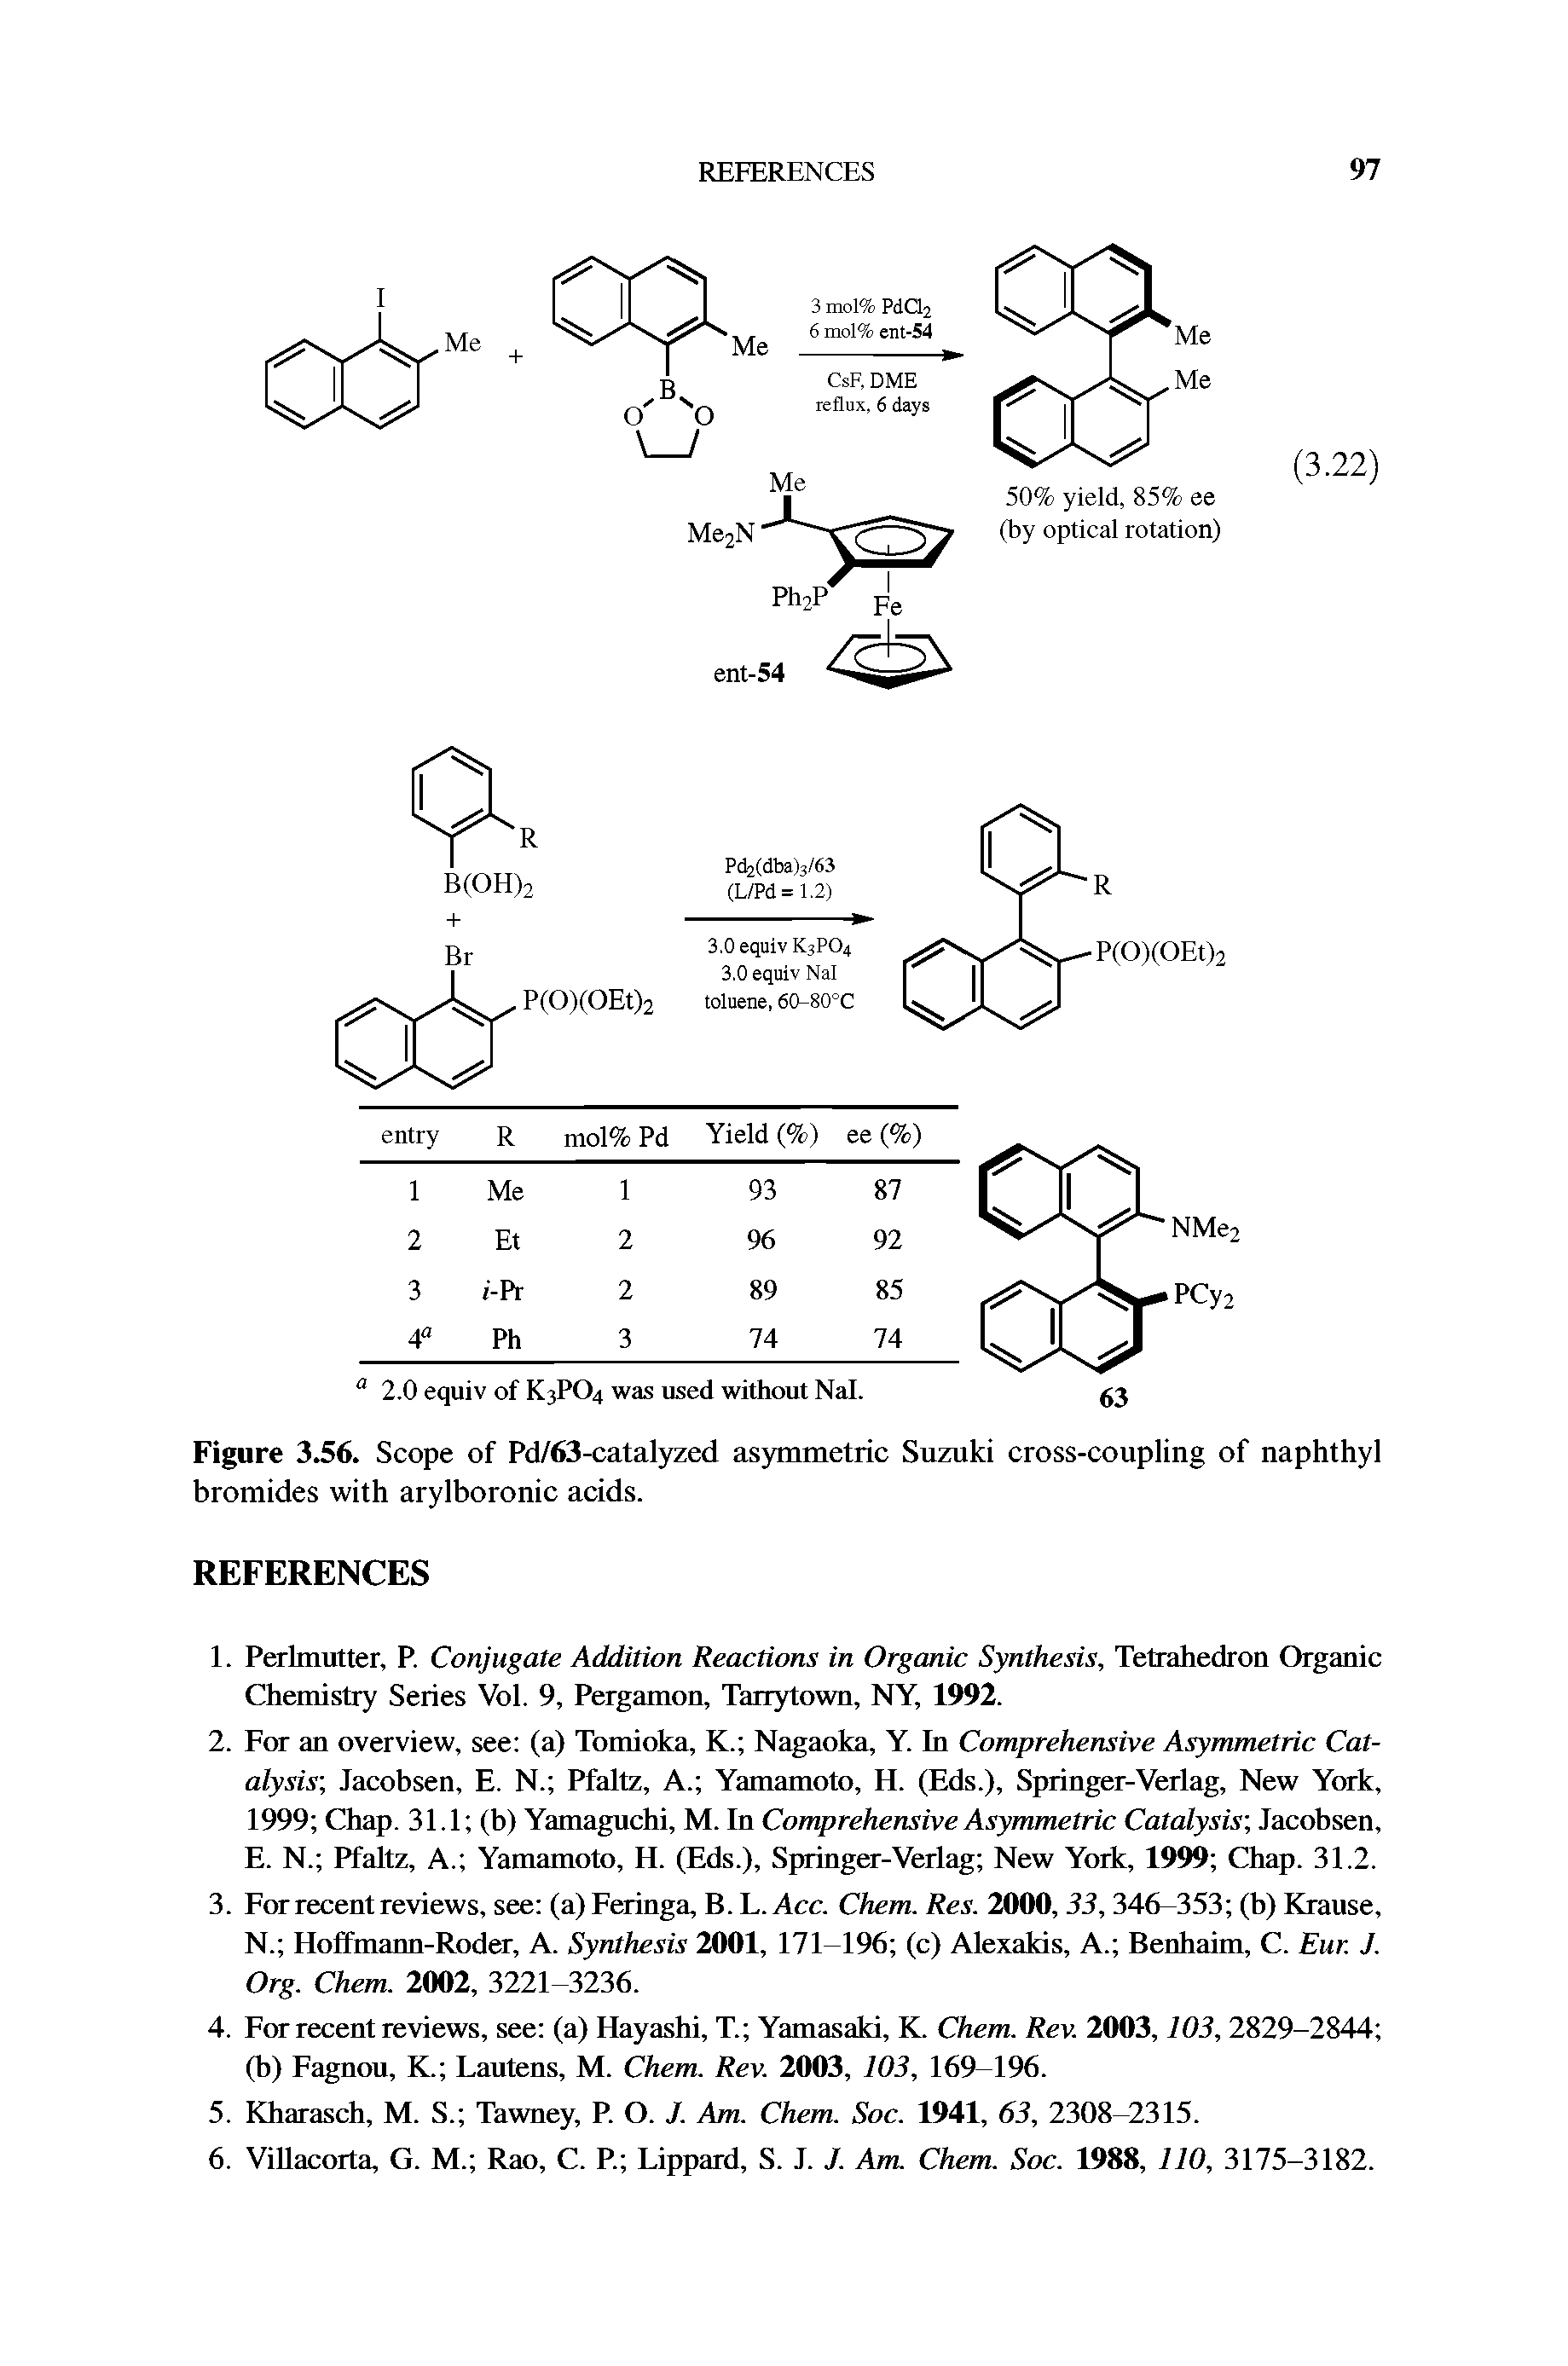 Figure 3.56. Scope of Pd/63-catalyzed as5mmetric Suzuki cross-coupling of naphthyl bromides with arylboronic acids.